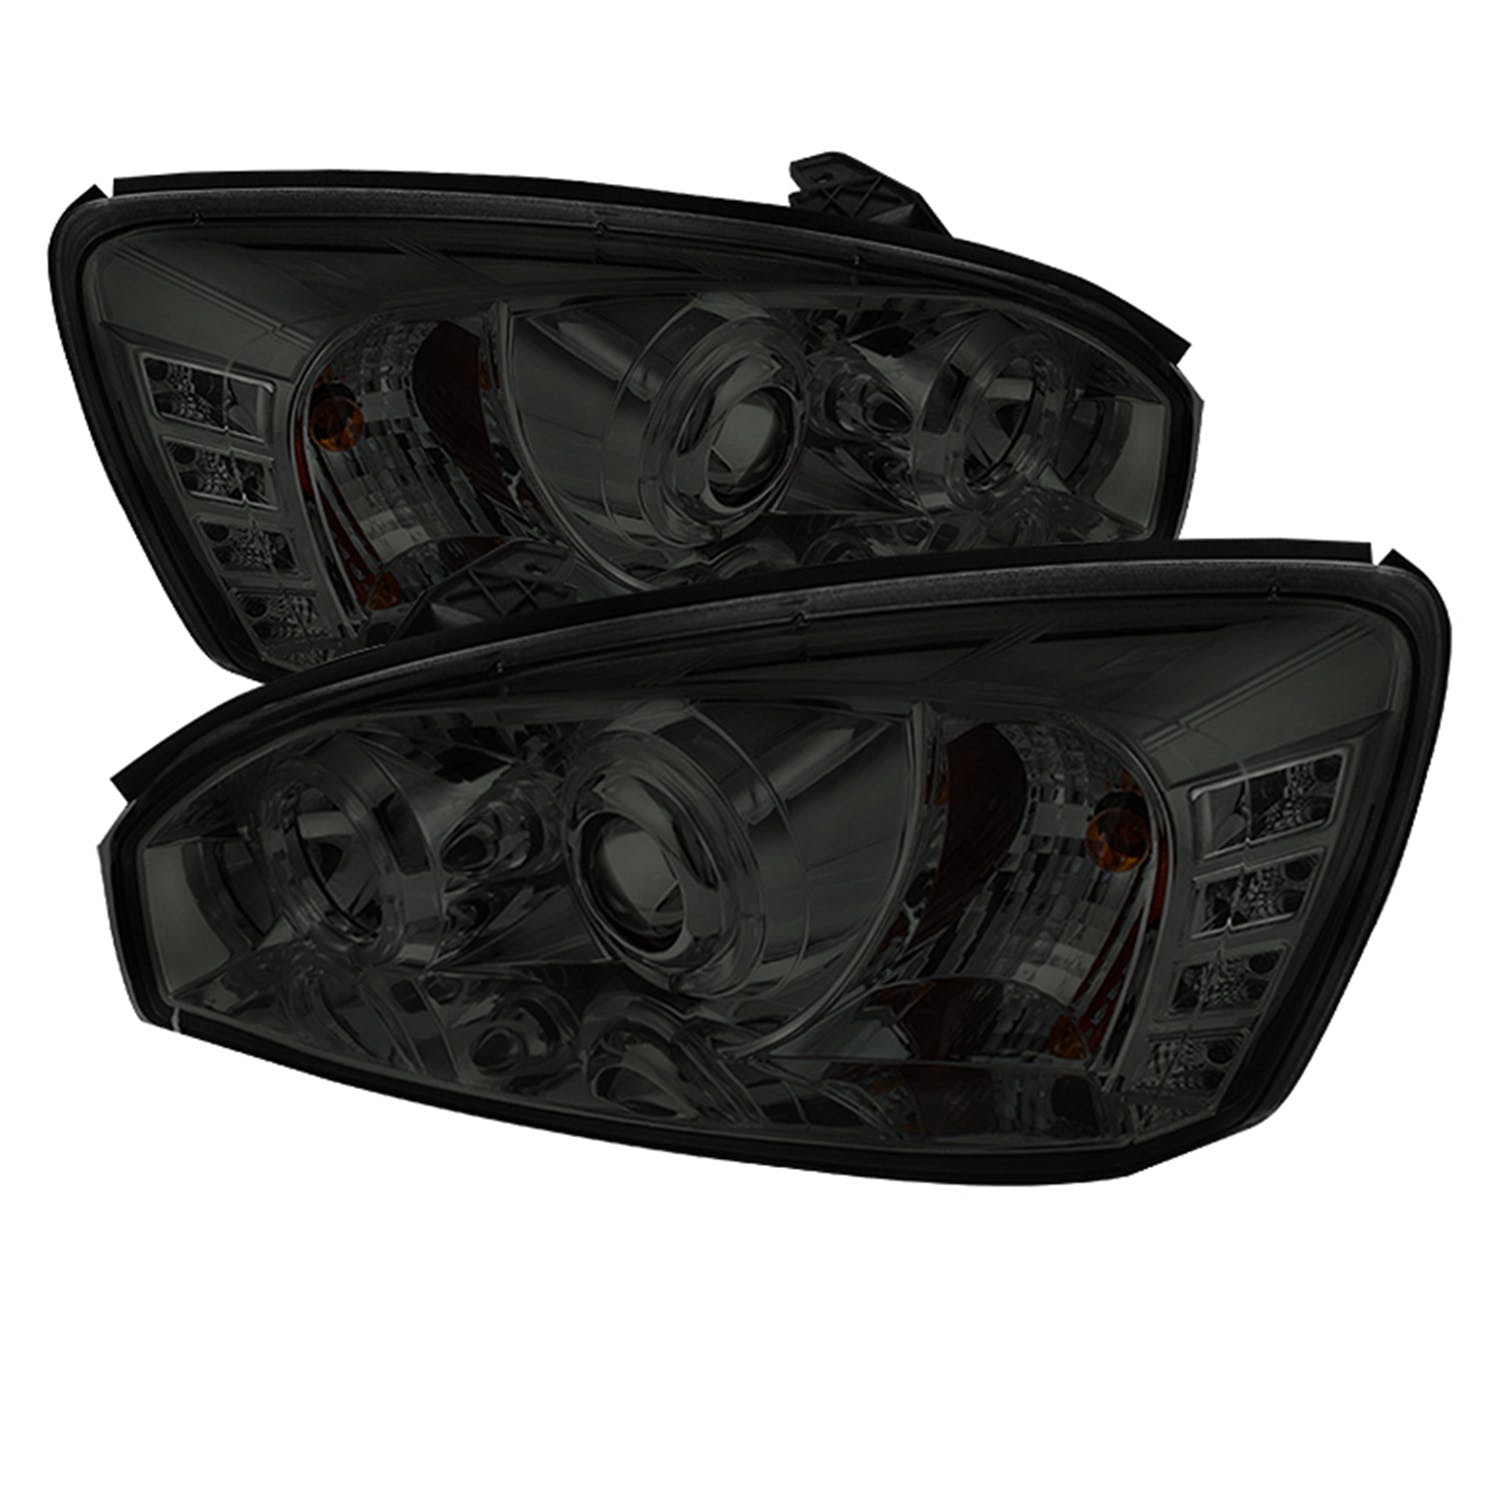 Spyder Auto 5042804 ( SPYDER ) CHEVY MALIBU 04-07 PROJECTOR HEADLIGHTS-LED HALO-LED ( REPLACEABLE LE